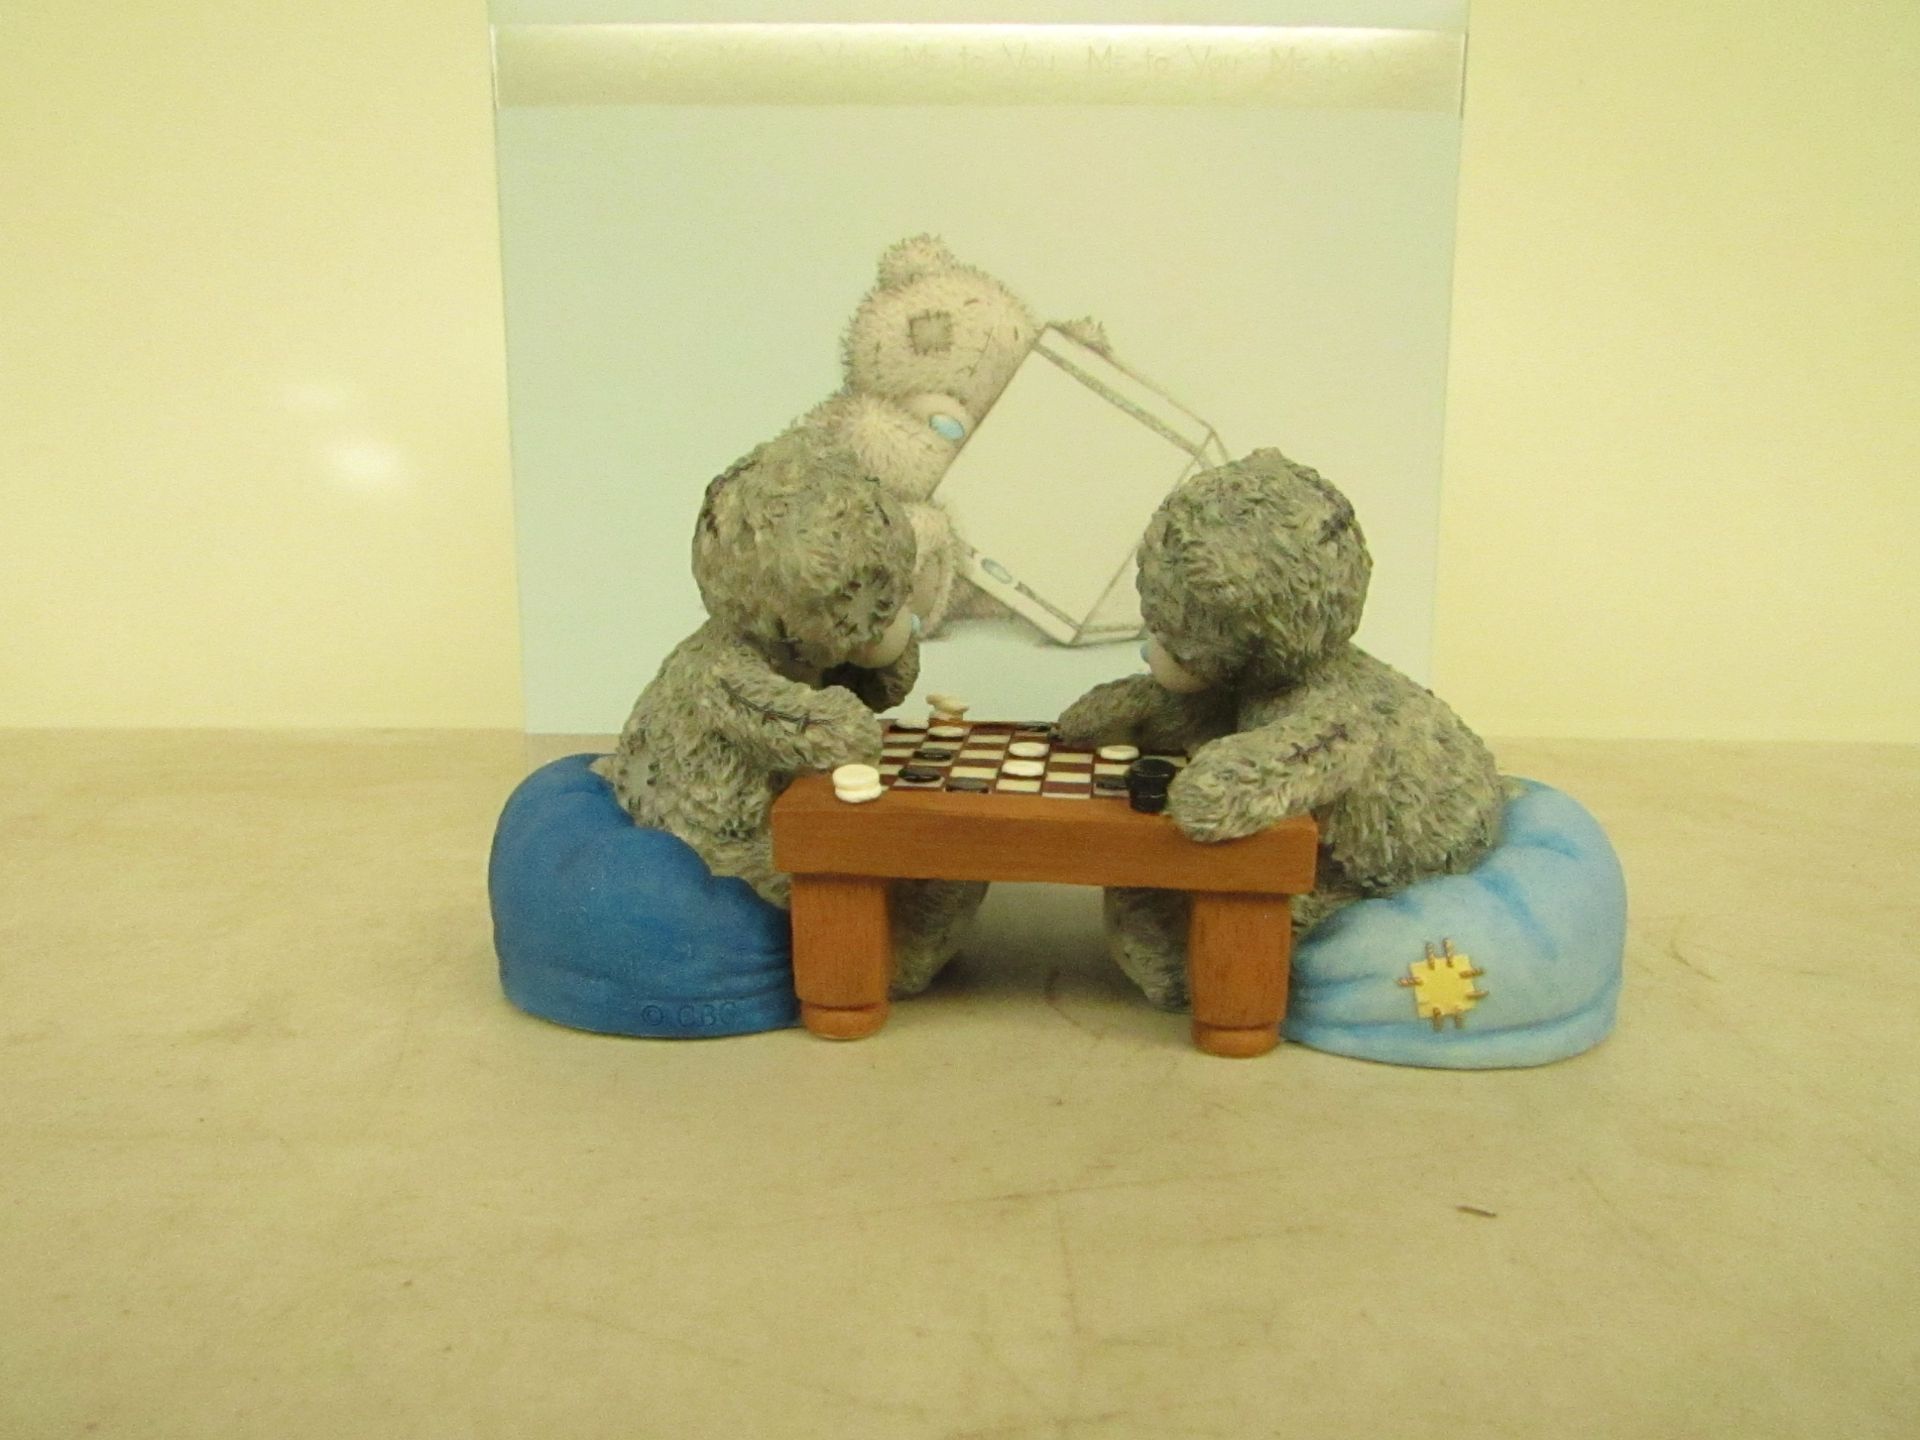 3x Me to You 'Time together' figurines, all new and boxed.